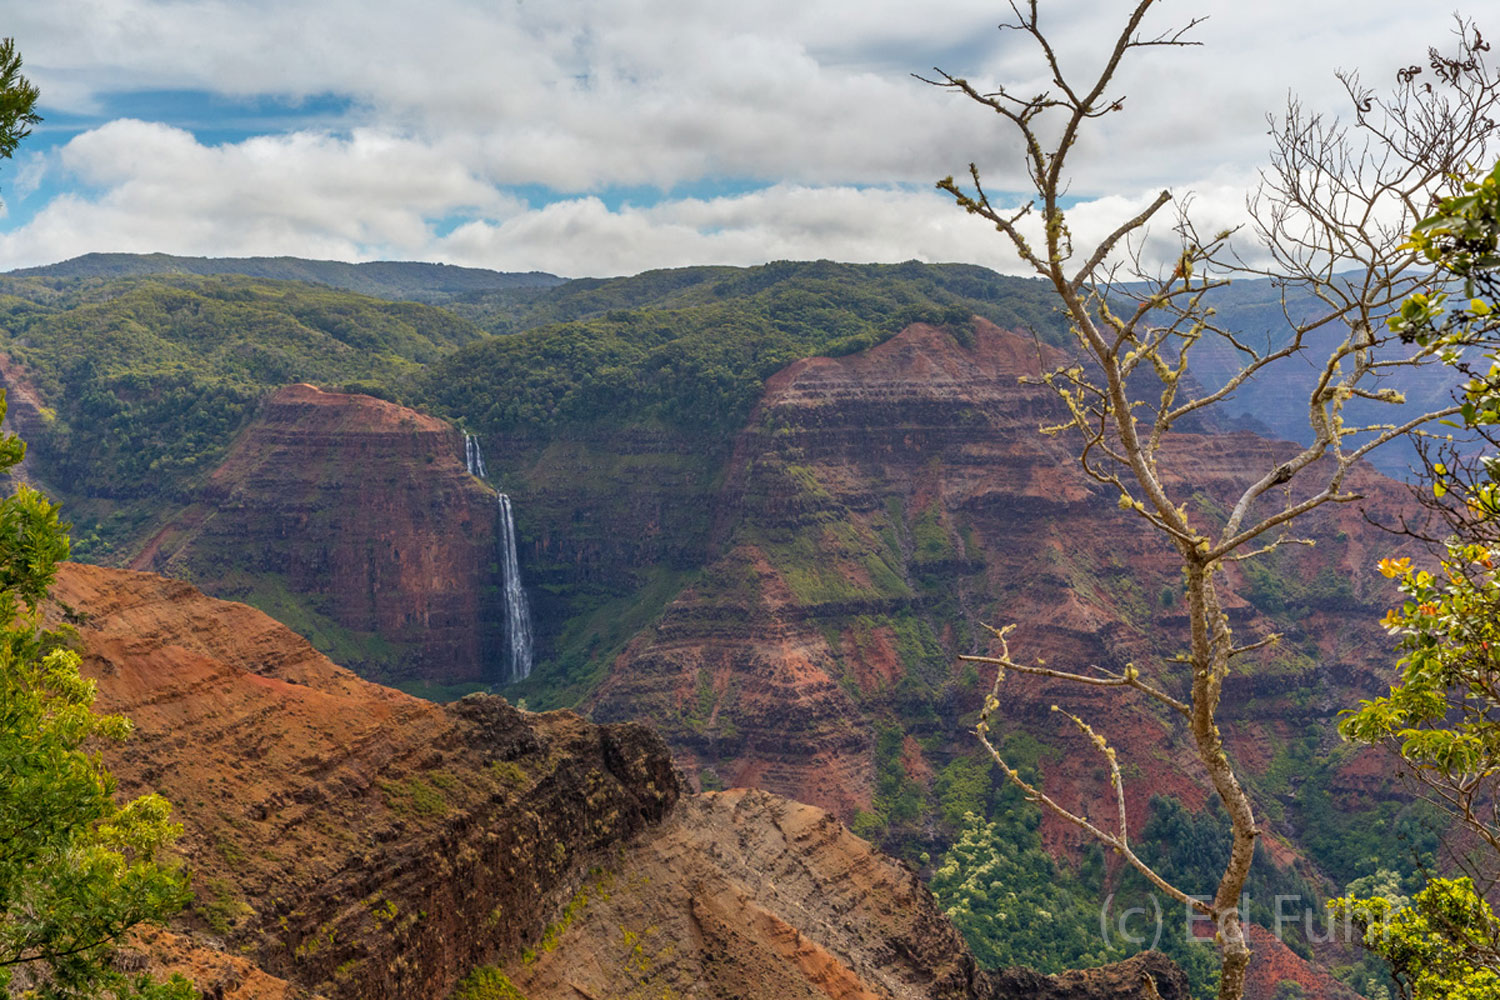 Nicknamed the Grand Canyon of the Pacific, Waimea Canyon is 14 miles long and more than a half mile deep, with numerous waterfalls...